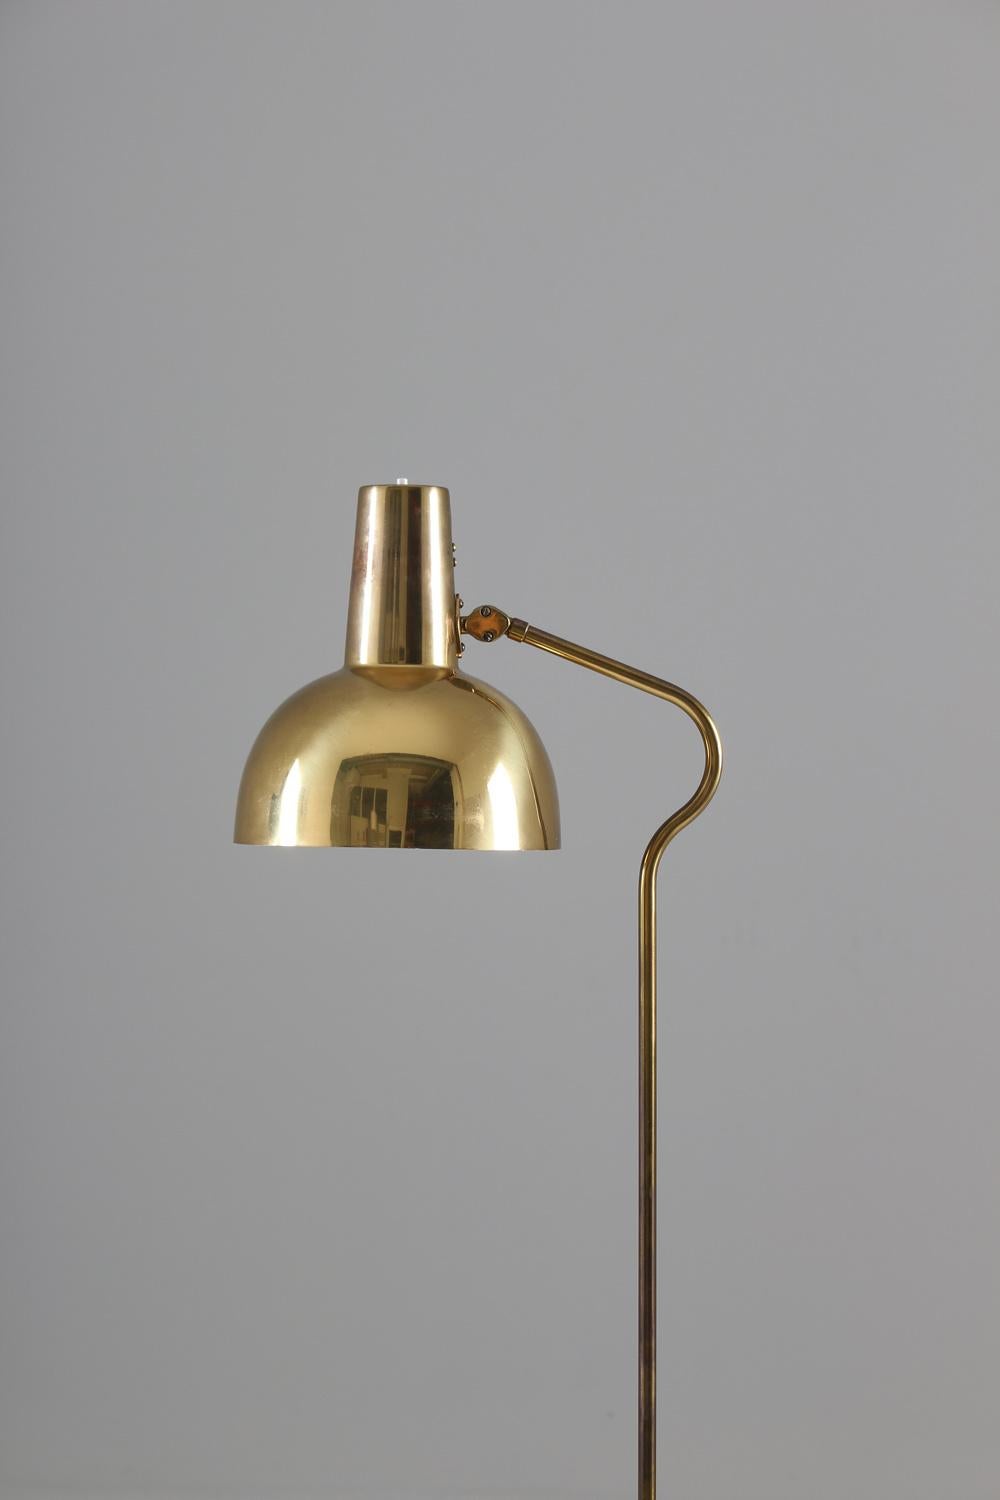 Floor lamp manufactured by ASEA, Sweden, 1960s.
Beautiful floor lamp in solid brass with adjustable shade. The stem is slightly cone-shaped and ends with a turn where the shade is fixtured.
Height 150-180cm
Condition: Good original condition with